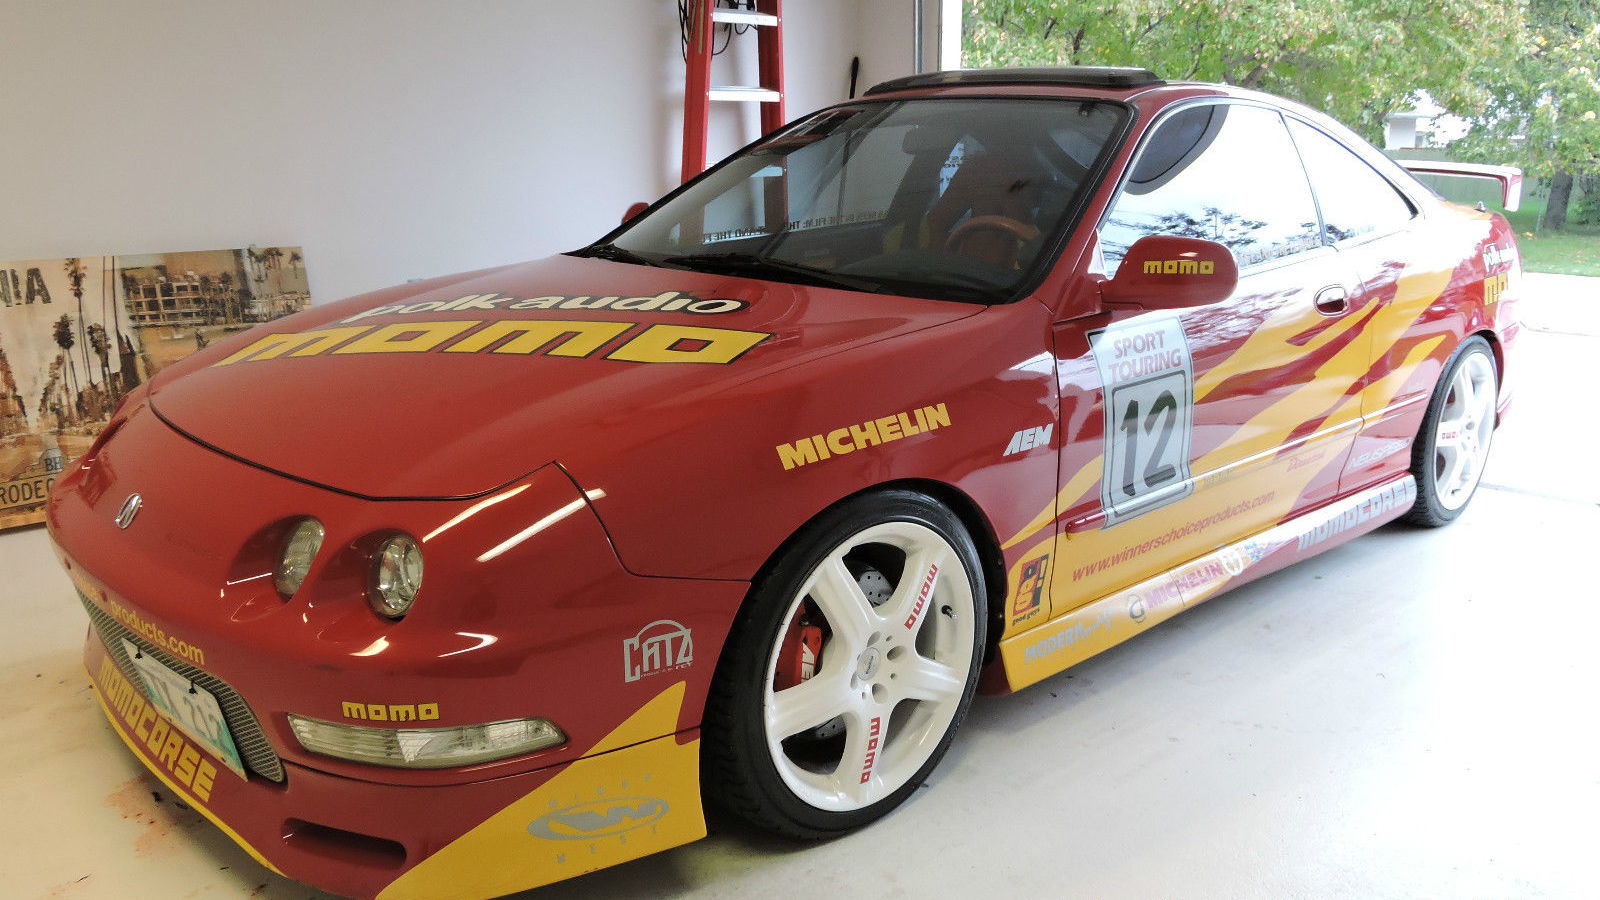 1996 Acura Integra GS-R from The Fast and the Furious. Photo by eBay user jim19490.